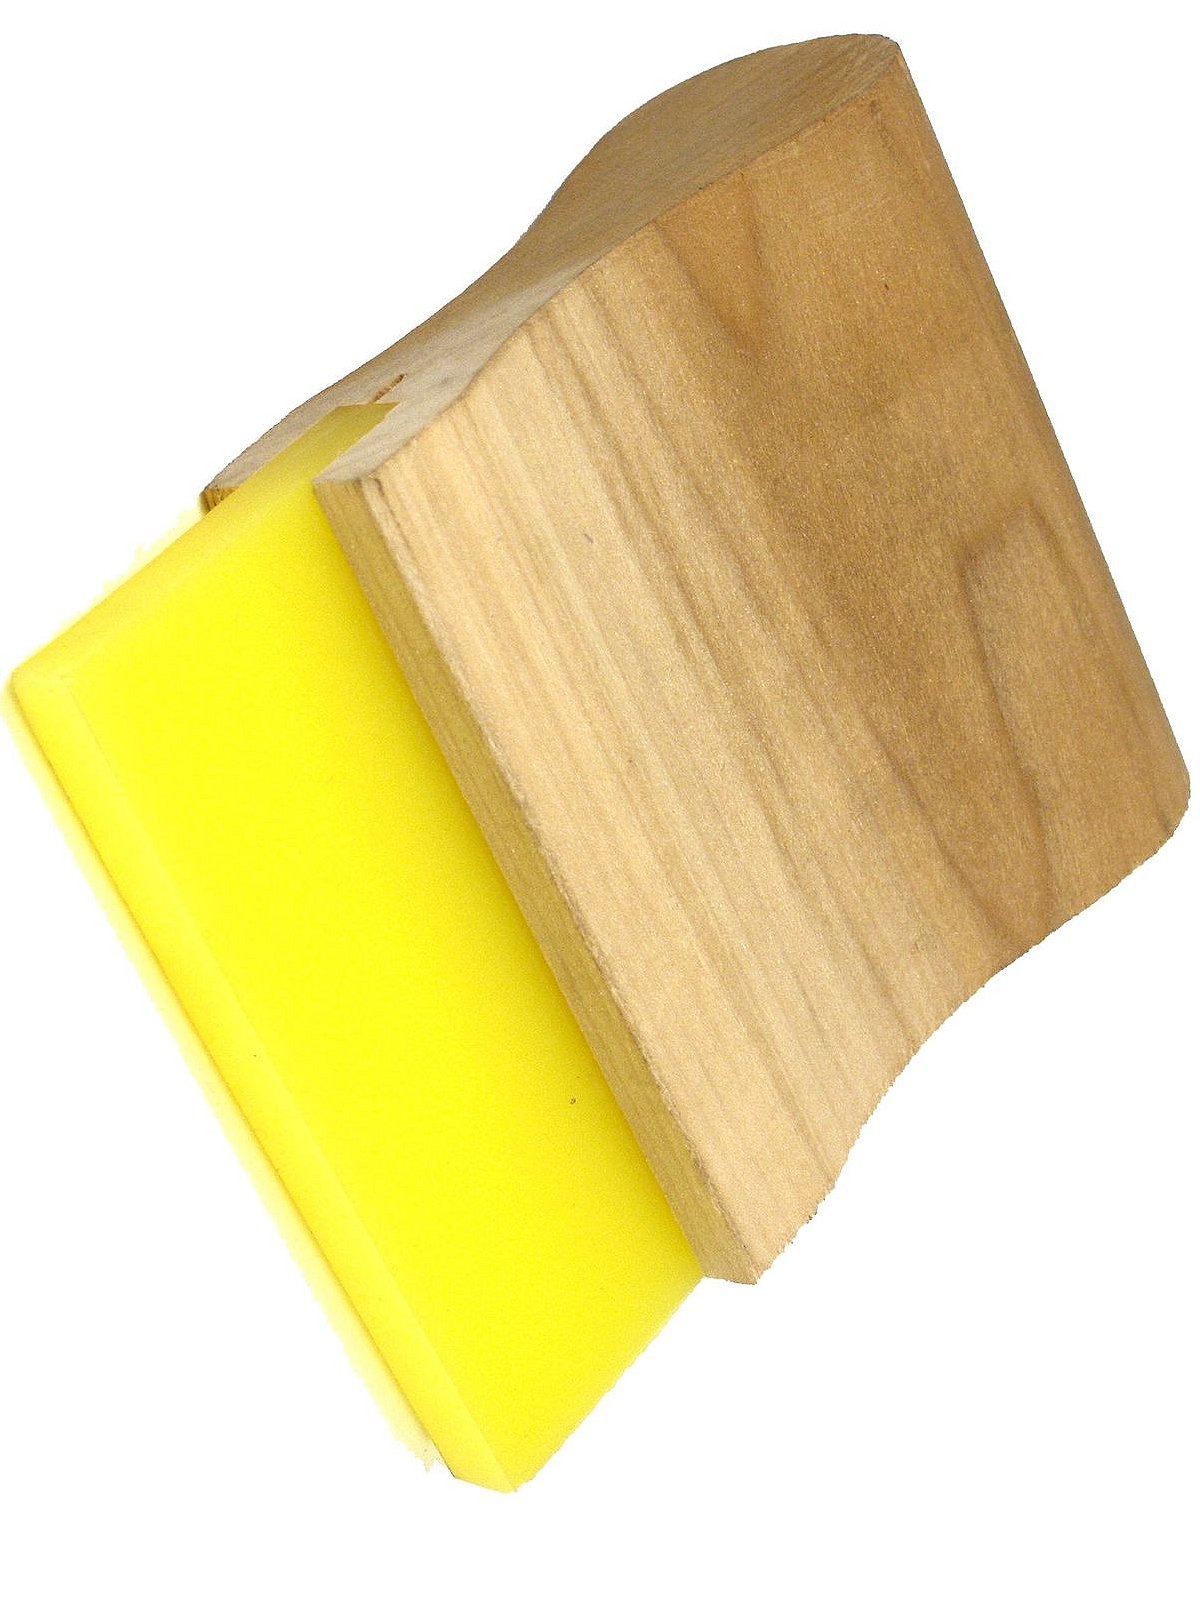 Graphic Screen Printing Squeegee - Rittagraf